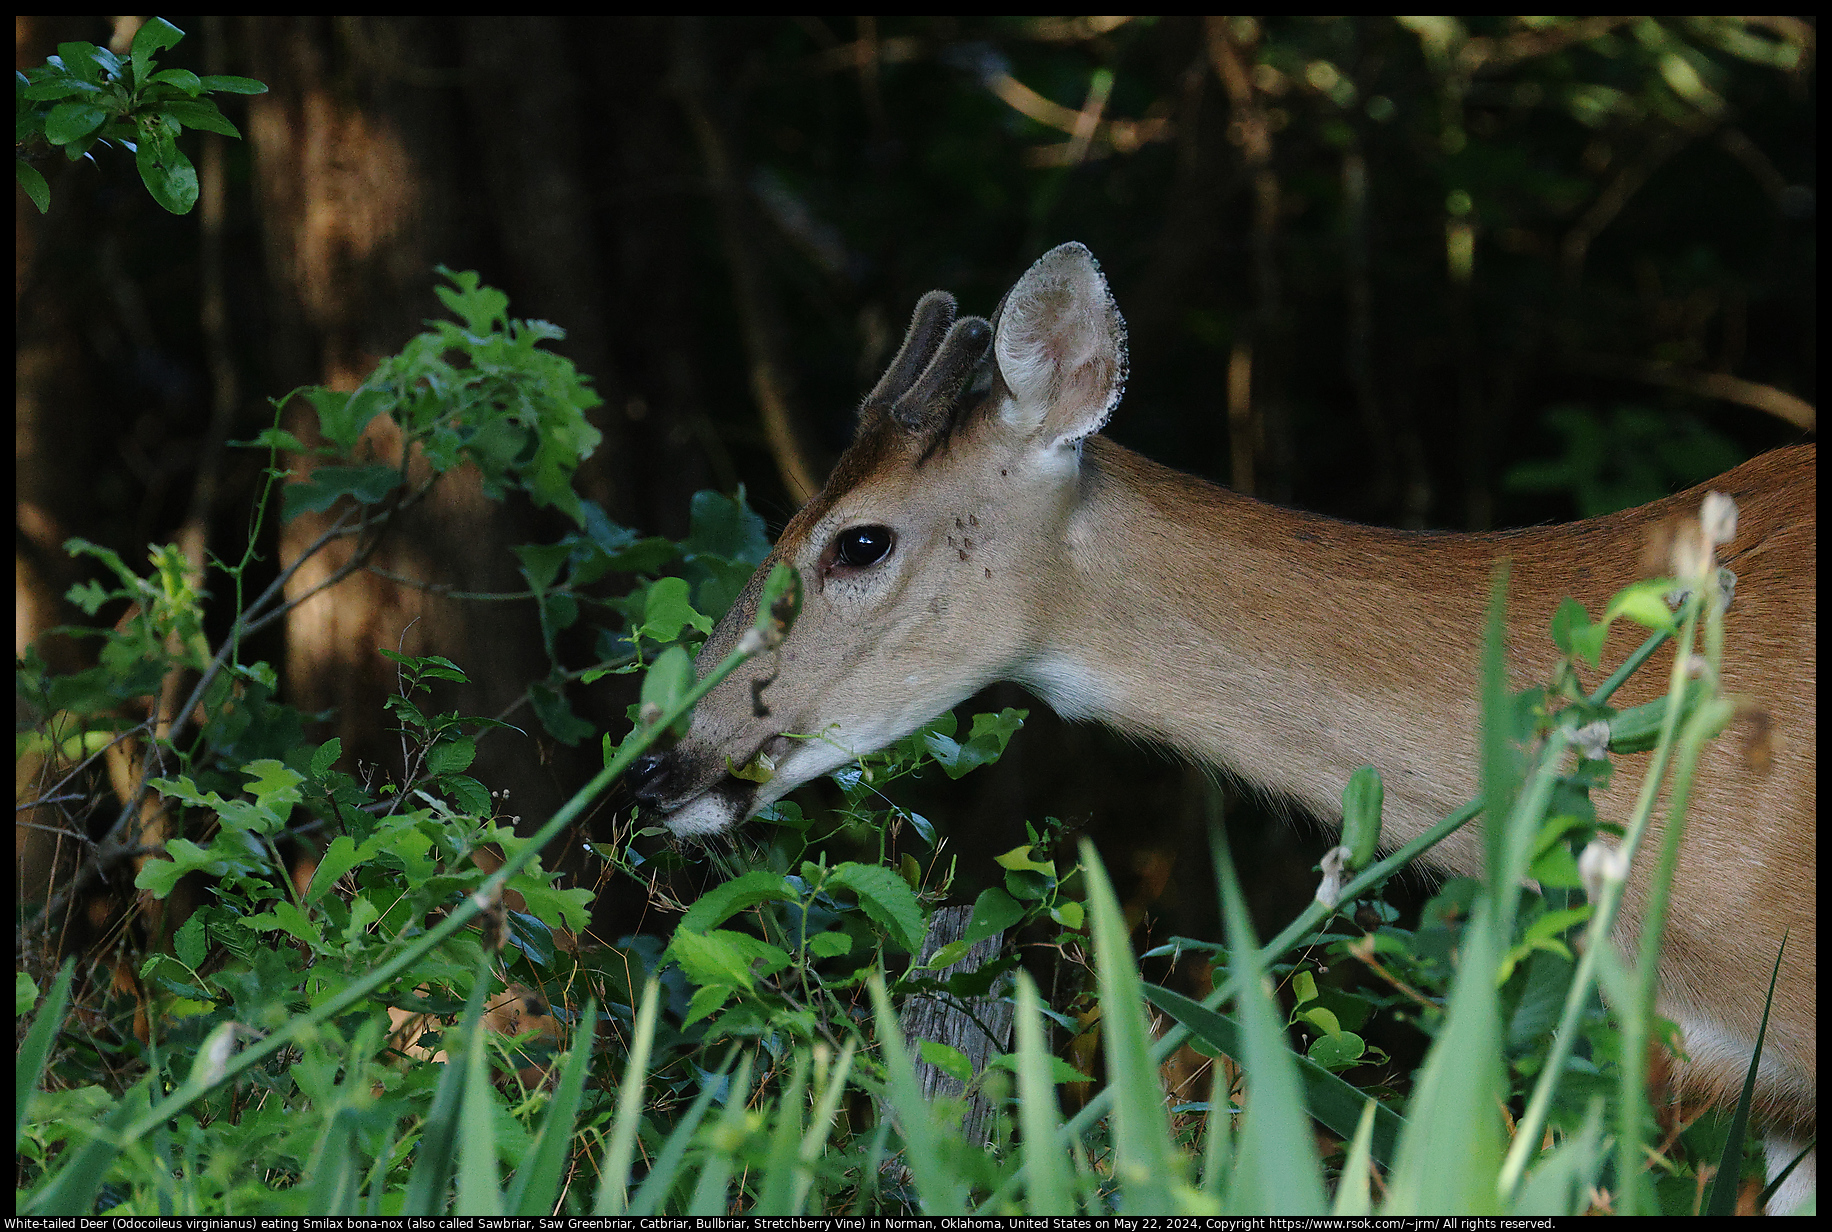 White-tailed Deer (Odocoileus virginianus) eating Smilax bona-nox (also called Sawbriar, Saw Greenbriar, Catbriar, Bullbriar, Stretchberry Vine) in Norman, Oklahoma, United States on May 22, 2024